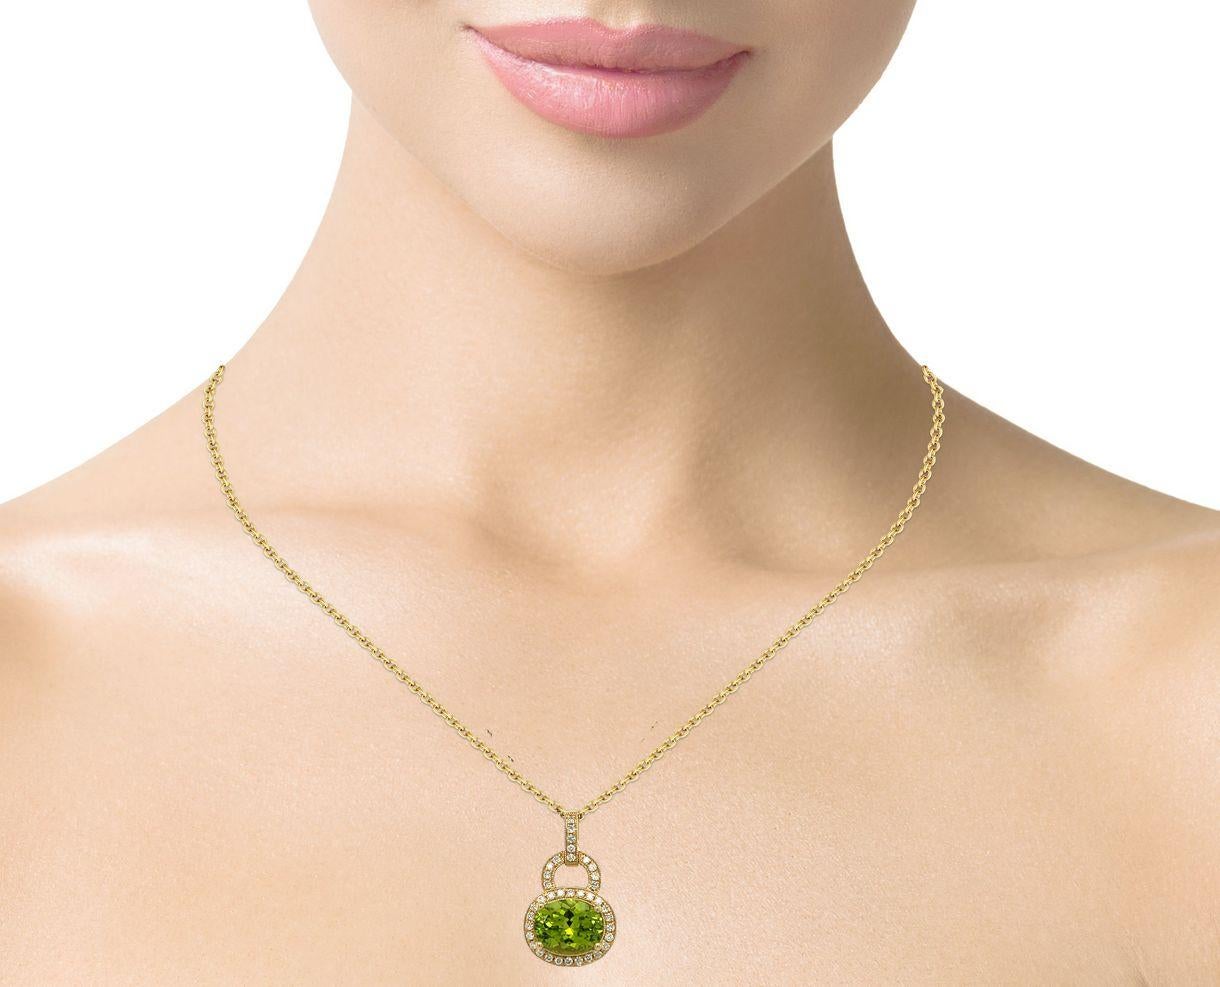 This elegant oval Peridot and diamond pendant is beautiful to wear everyday. It has a 4 prong setting in 14 karat yellow gold. Comes with a gold plated chain, gold chain sold separately. Pendant is brand new with detailed tags attached and comes in